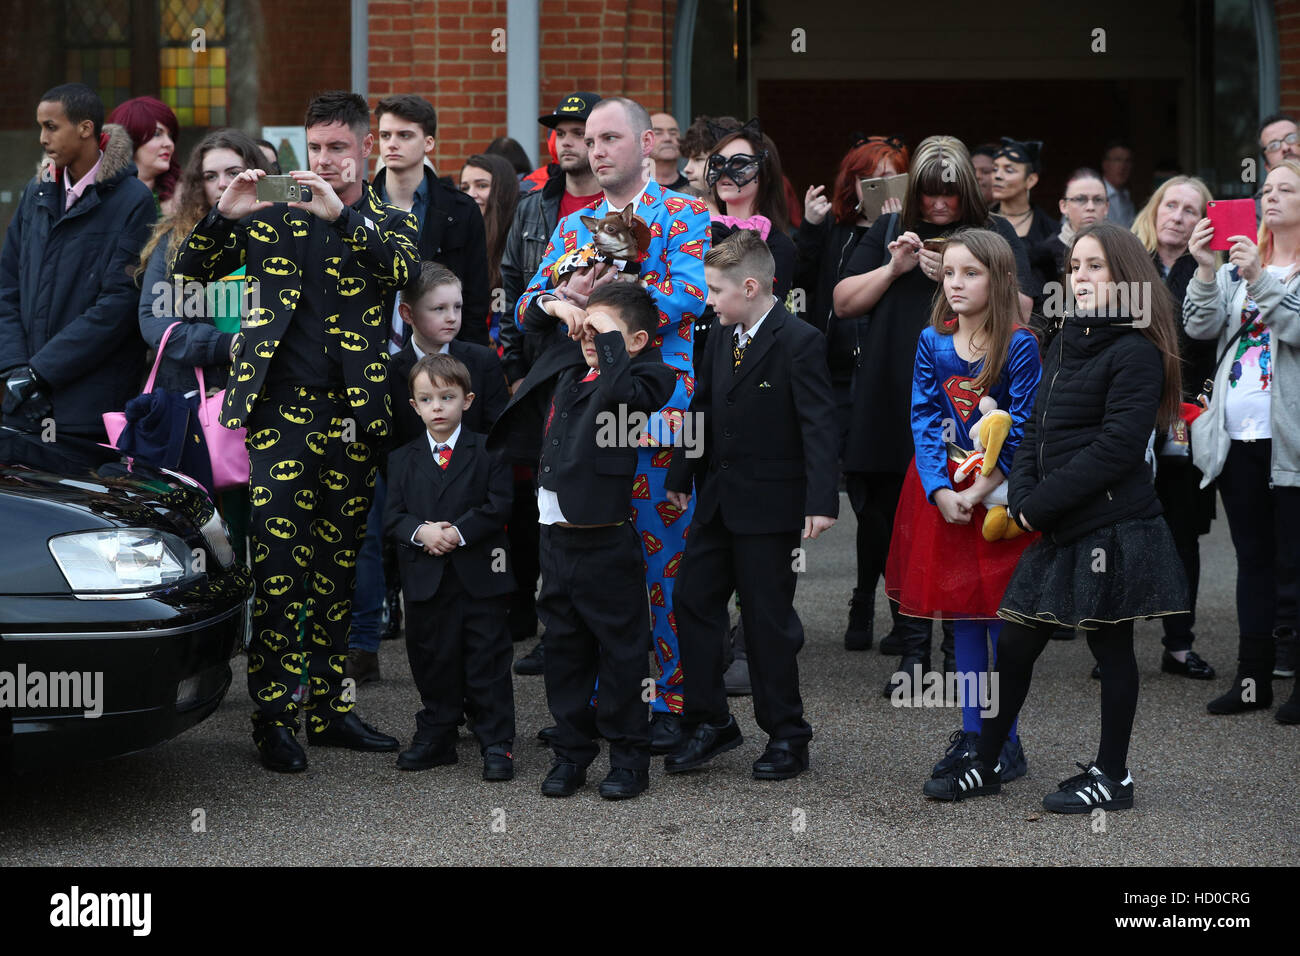 Mourners dressed as superheroes attend the funeral of 18-year-old Arthur Peebles at North East Surrey Crematorium in Morden, conducted by Co-op Funeralcare. Stock Photo